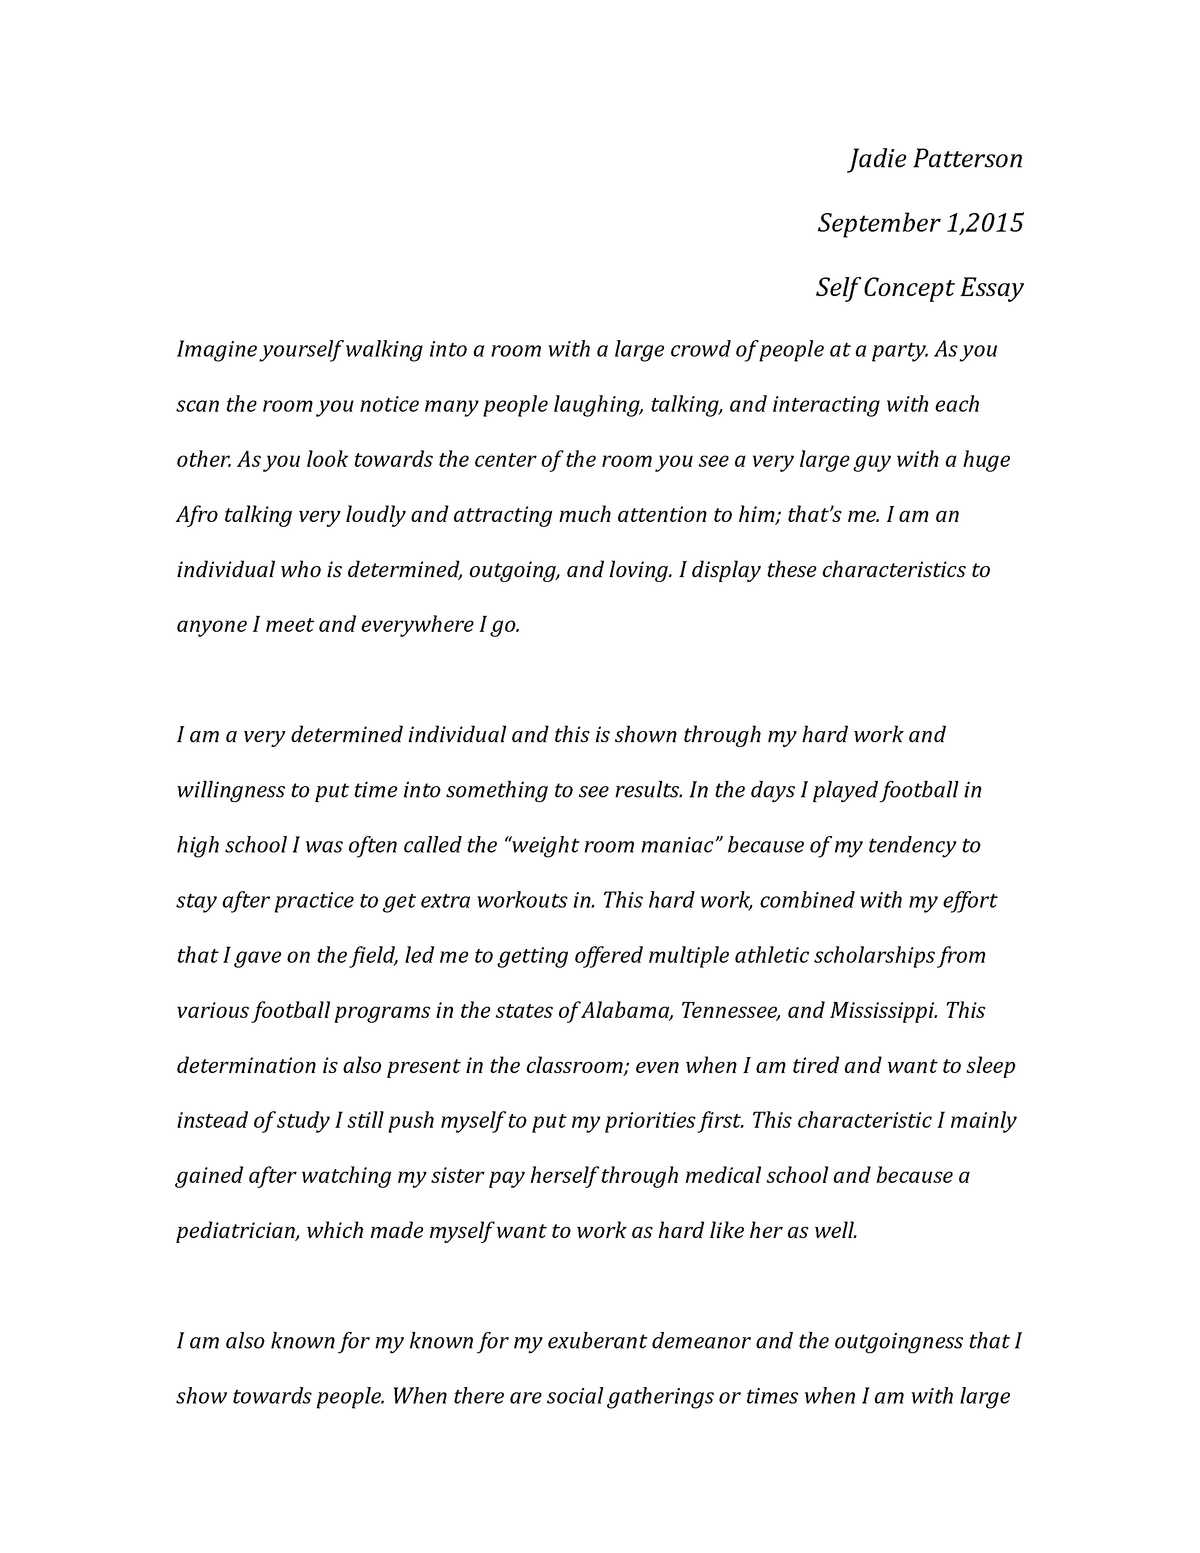 essay about myself 11th class